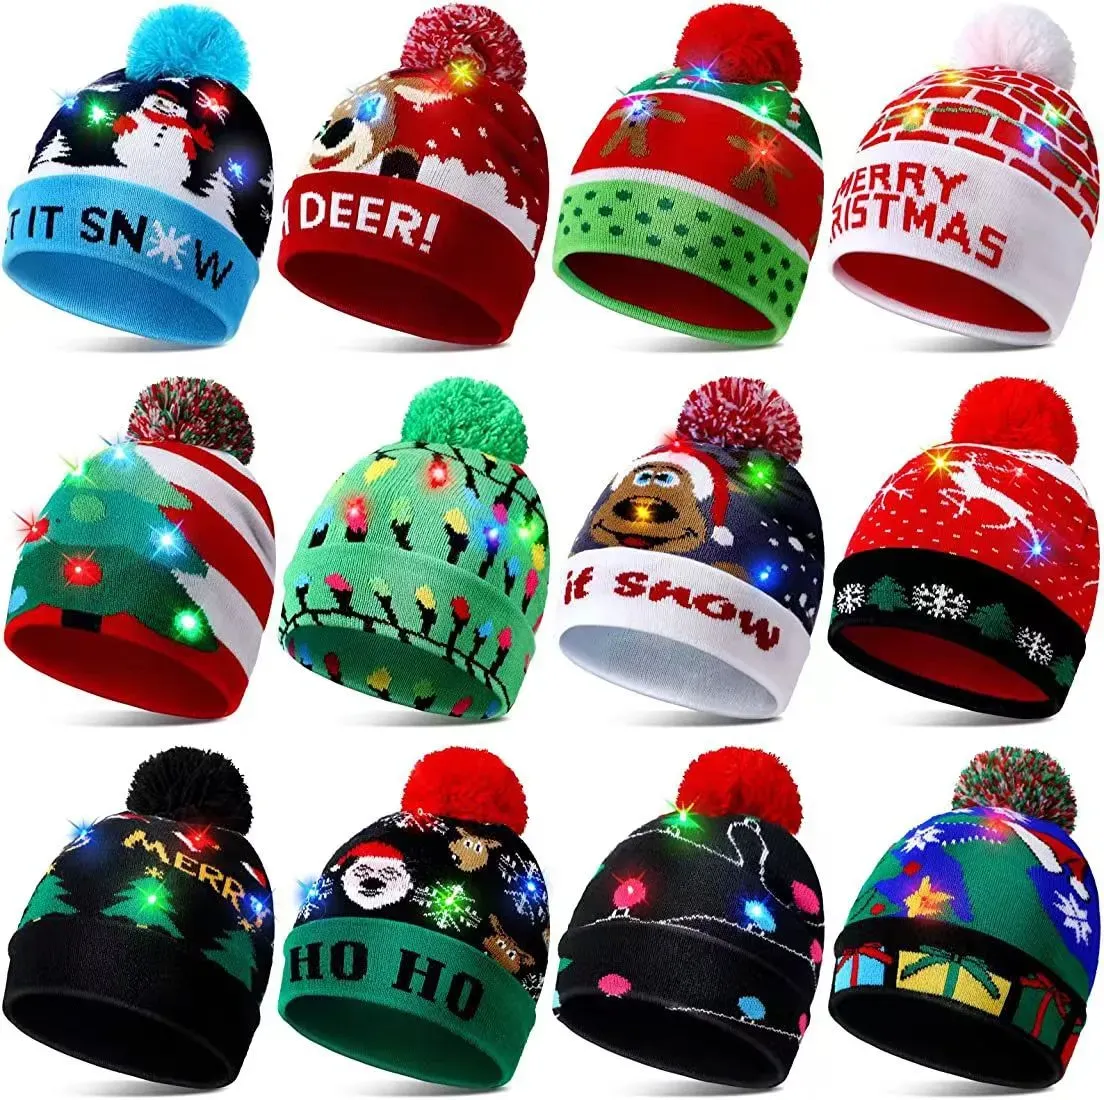 Fashionable Christmas LED light knitted hat lantern party warm adult ball hat wholesale 1103